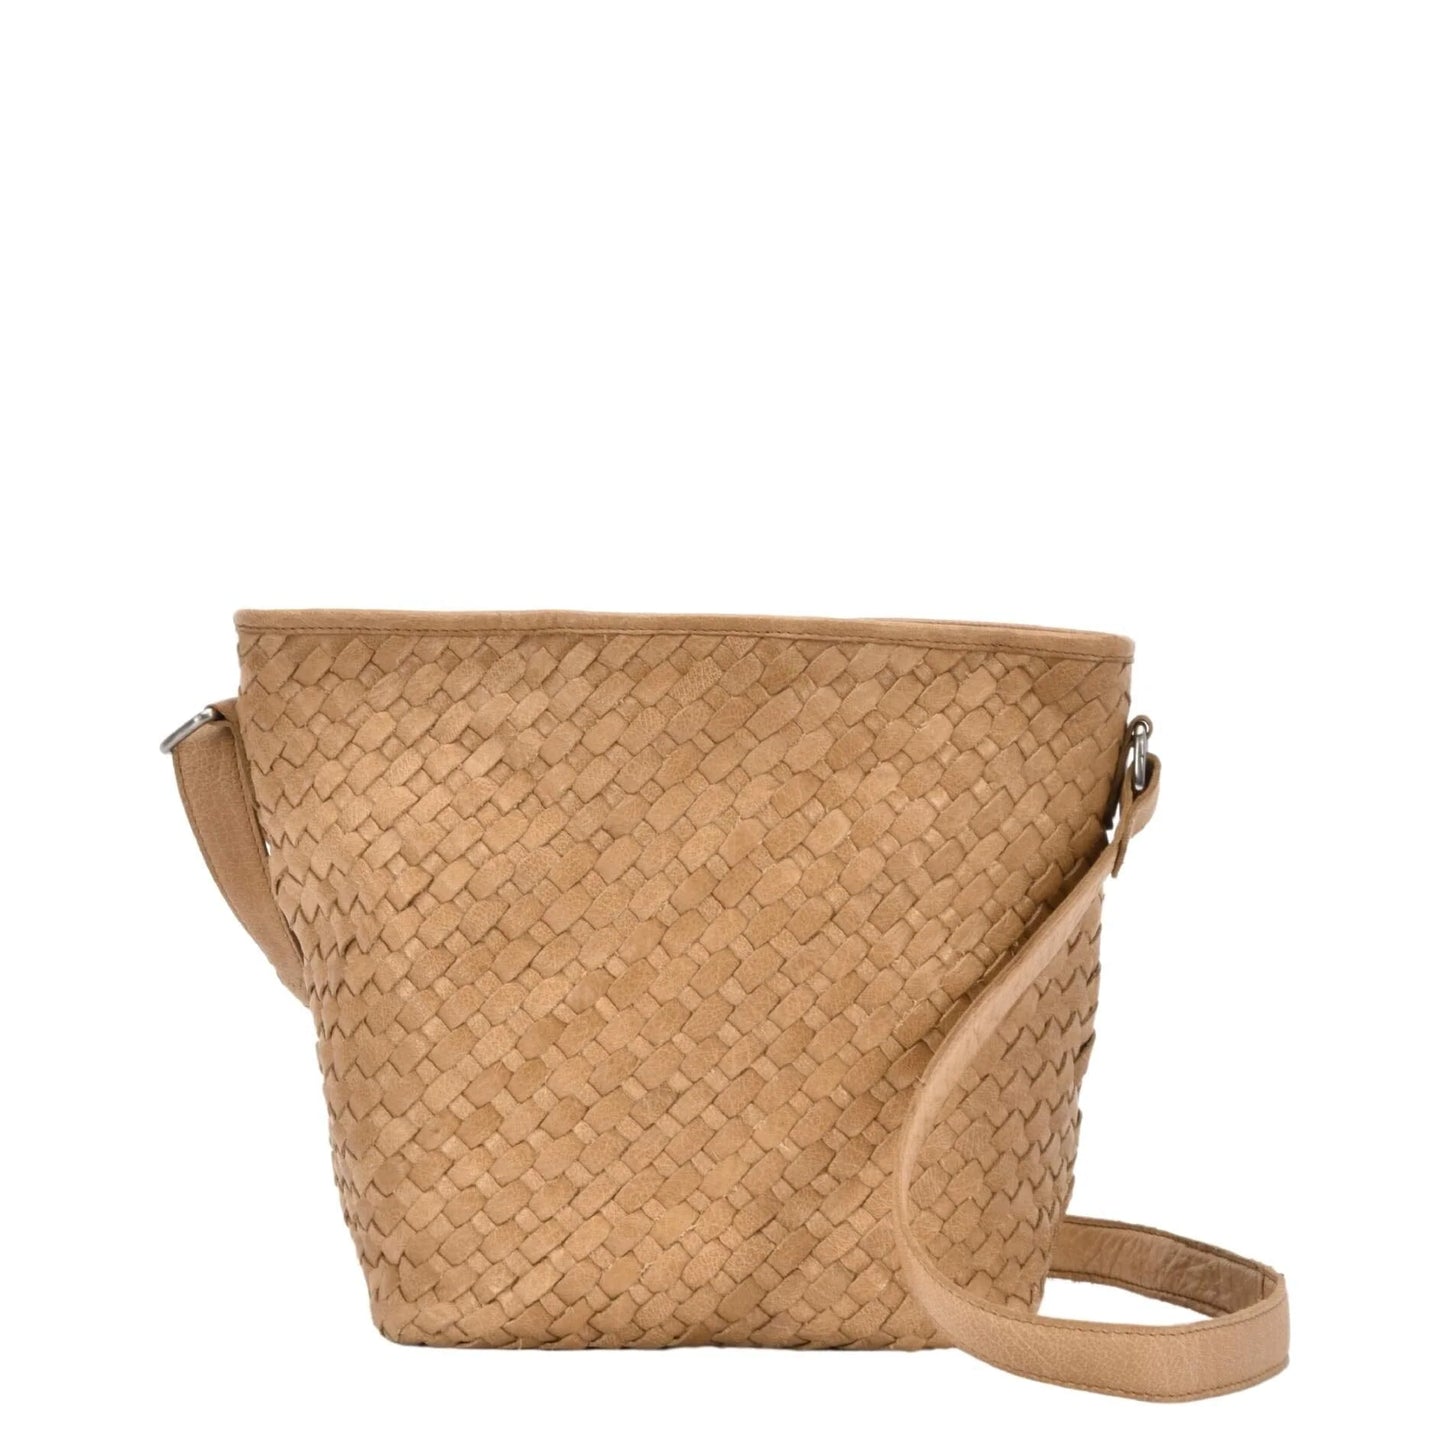 Cobb and Co Canterbury Woven Leather Bag